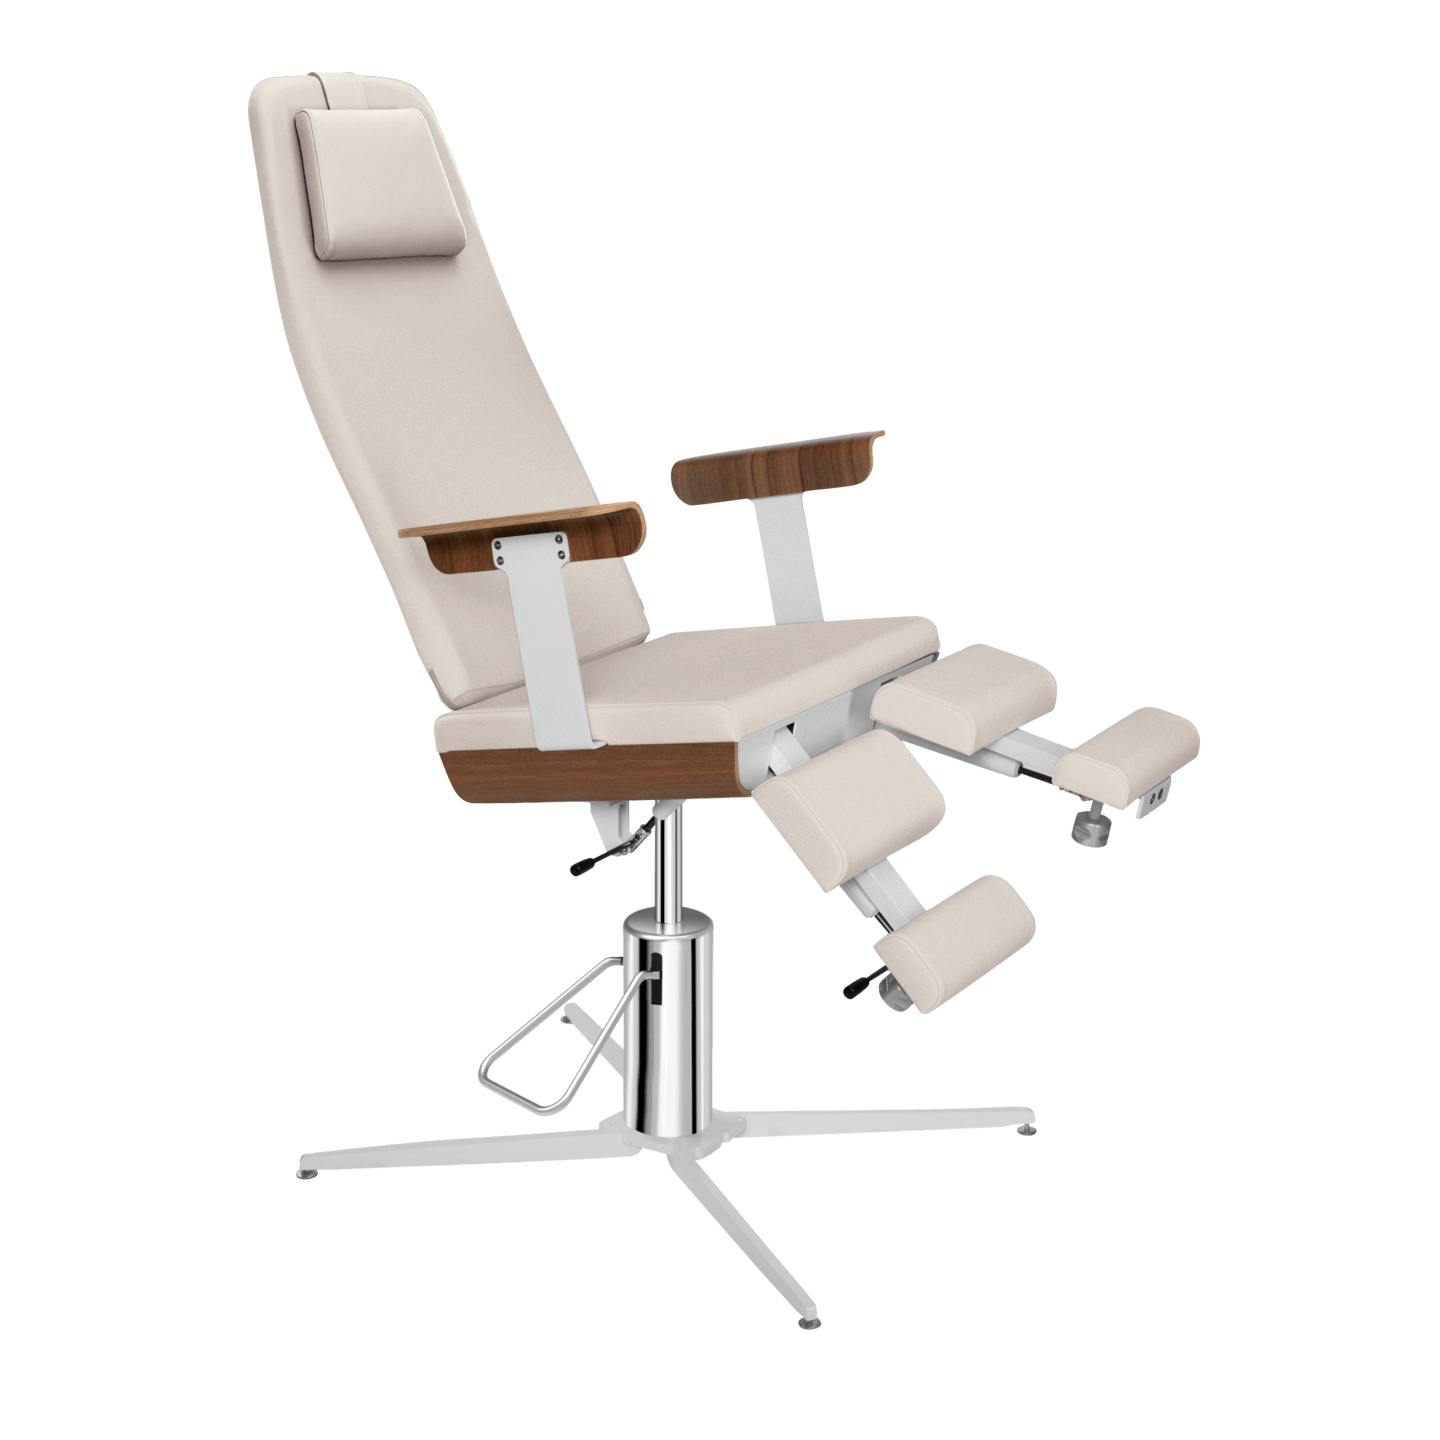 RUCK - SINA Hydraulic Foot Care Chair in natural